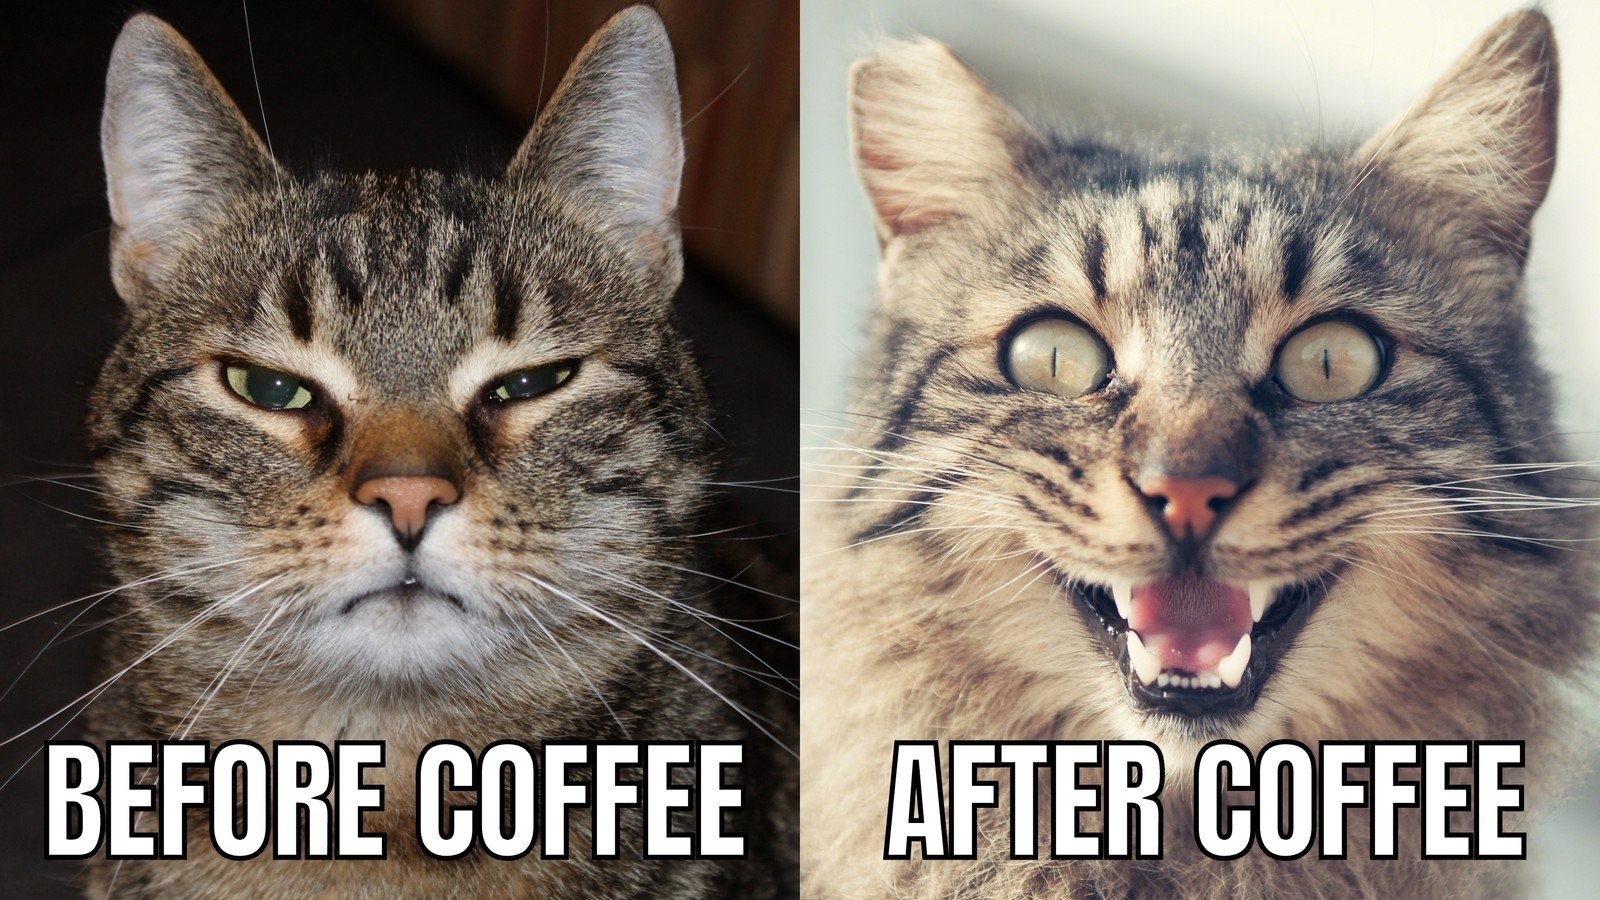 canva-cat-before-coffee-after-coffee-two-photos-and-text-meme-QZiqeDqC-q4.jpg